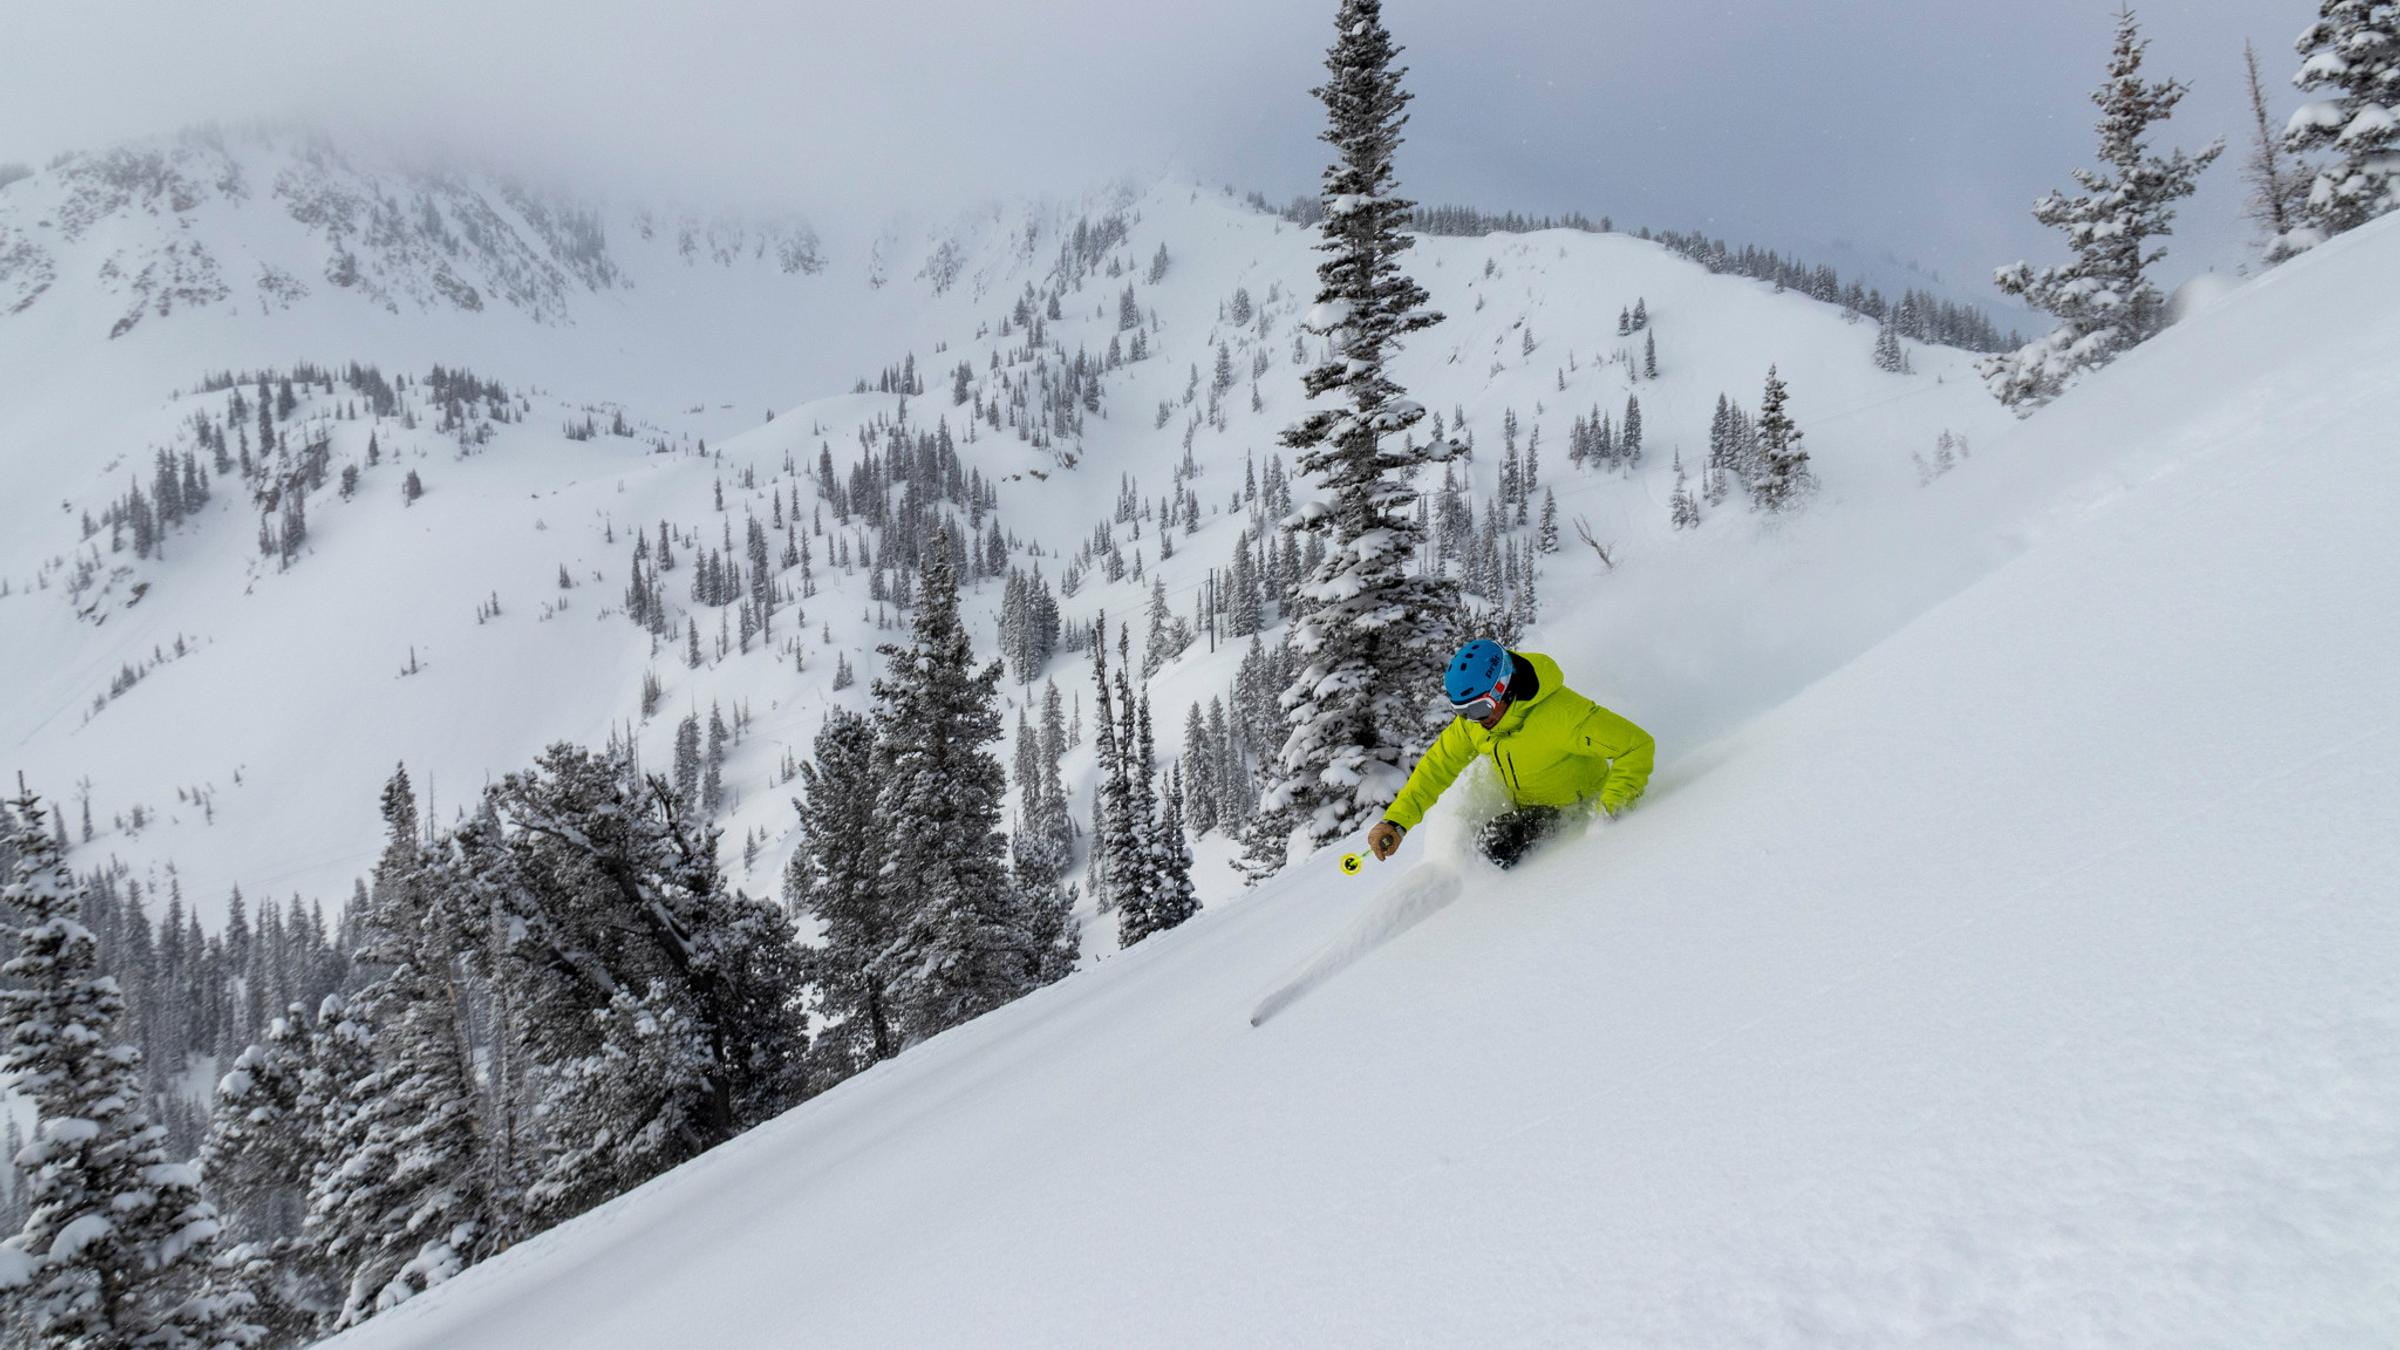 Skier takes a turn in powder on Highway to Heaven at Solitude Mountain Resort